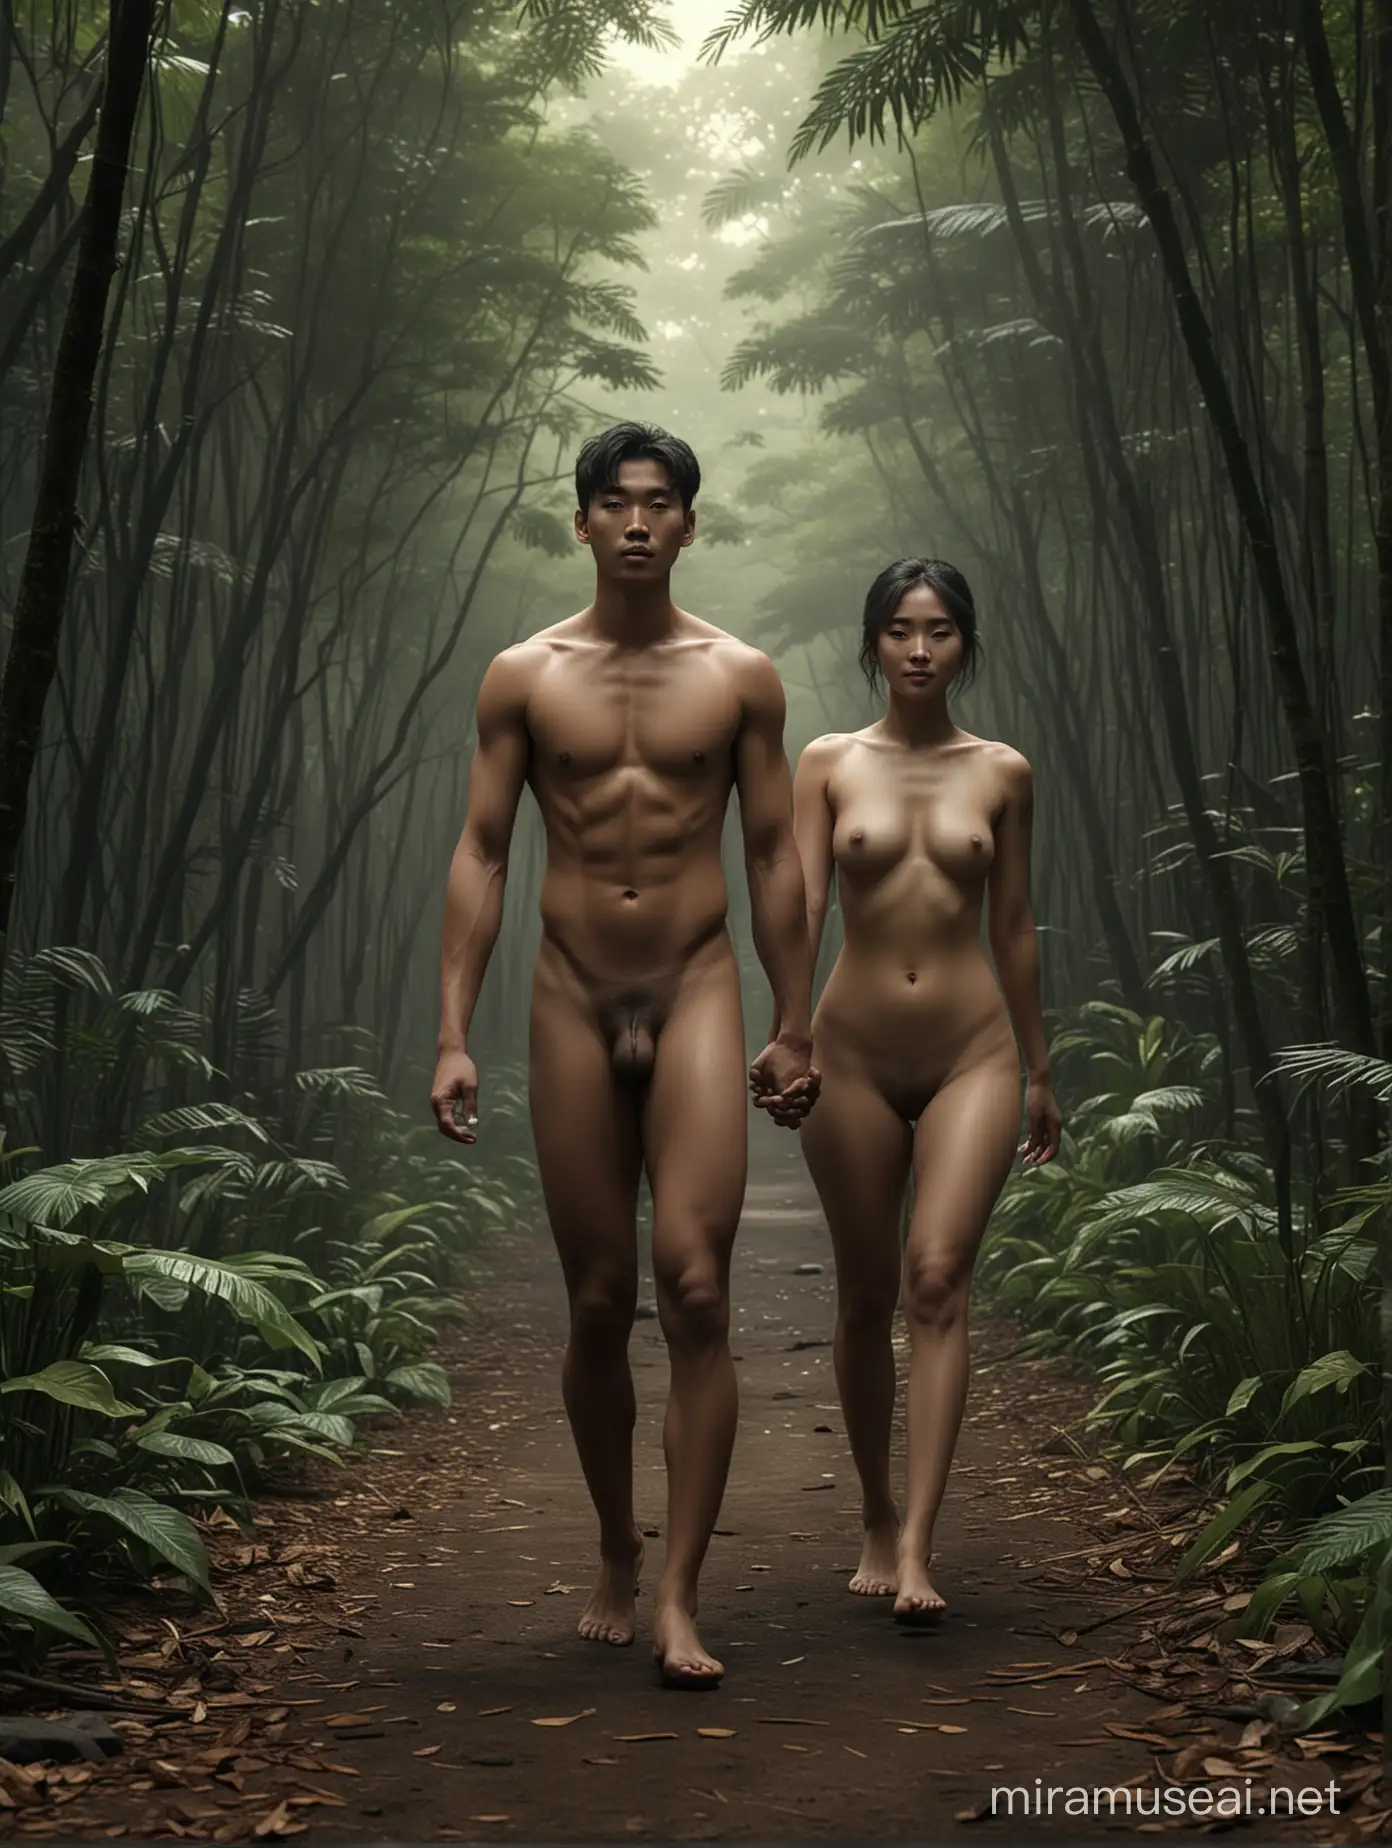 Naked Korean Man and Indonesian Woman Holding Hands in Dark Tropical Forest Hyper Realistic Full HD 46K